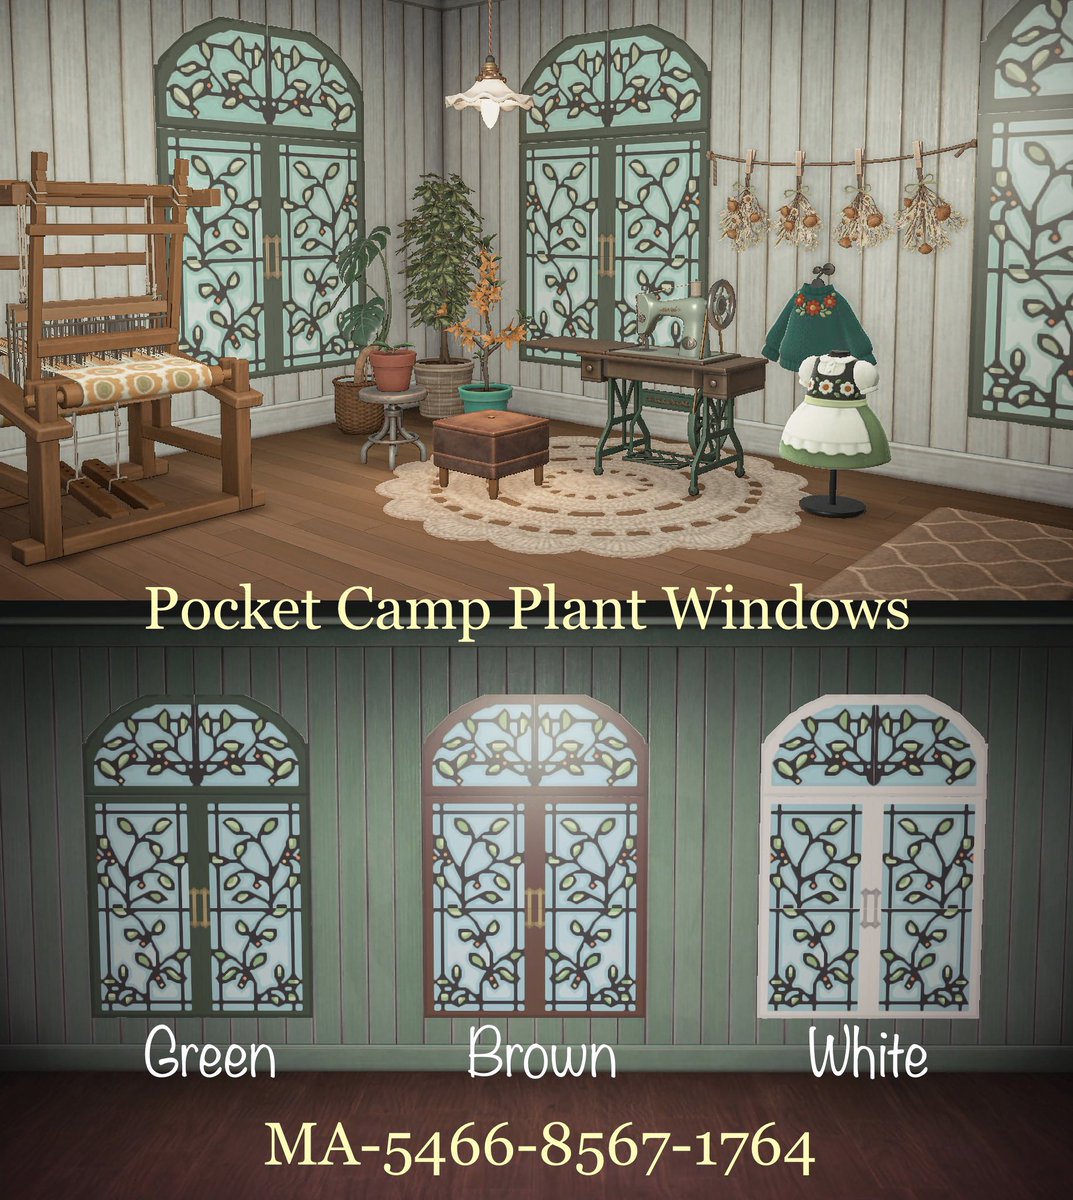 I made the Pocket Camp Plant Windows for ACNH!! All three colors are available to download on my creator code! 🥰

#acnh #animalcrossingnewhorizons  #animalcrossing  #マイデザイン #あつ森写真部  #どうぶつの森 #あつ森 #あつ森 #nintendoswitch #nintendo #acnhcodes